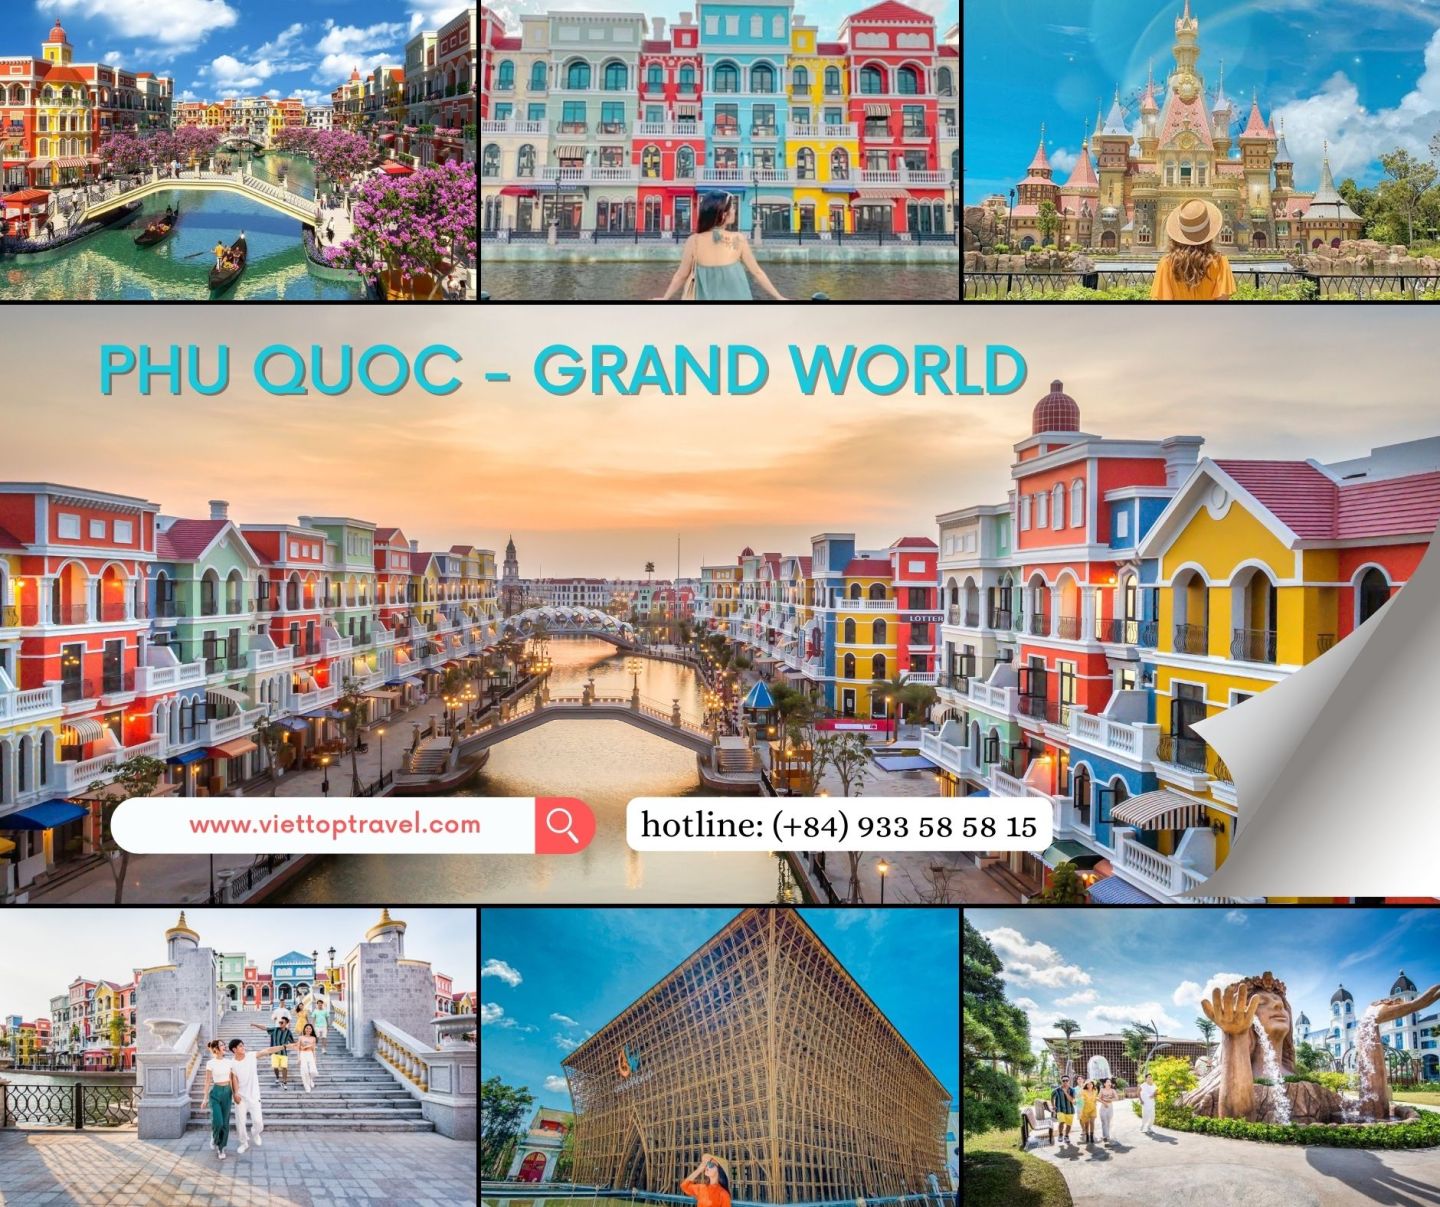 Grand World Phu Quoc is waiting for you